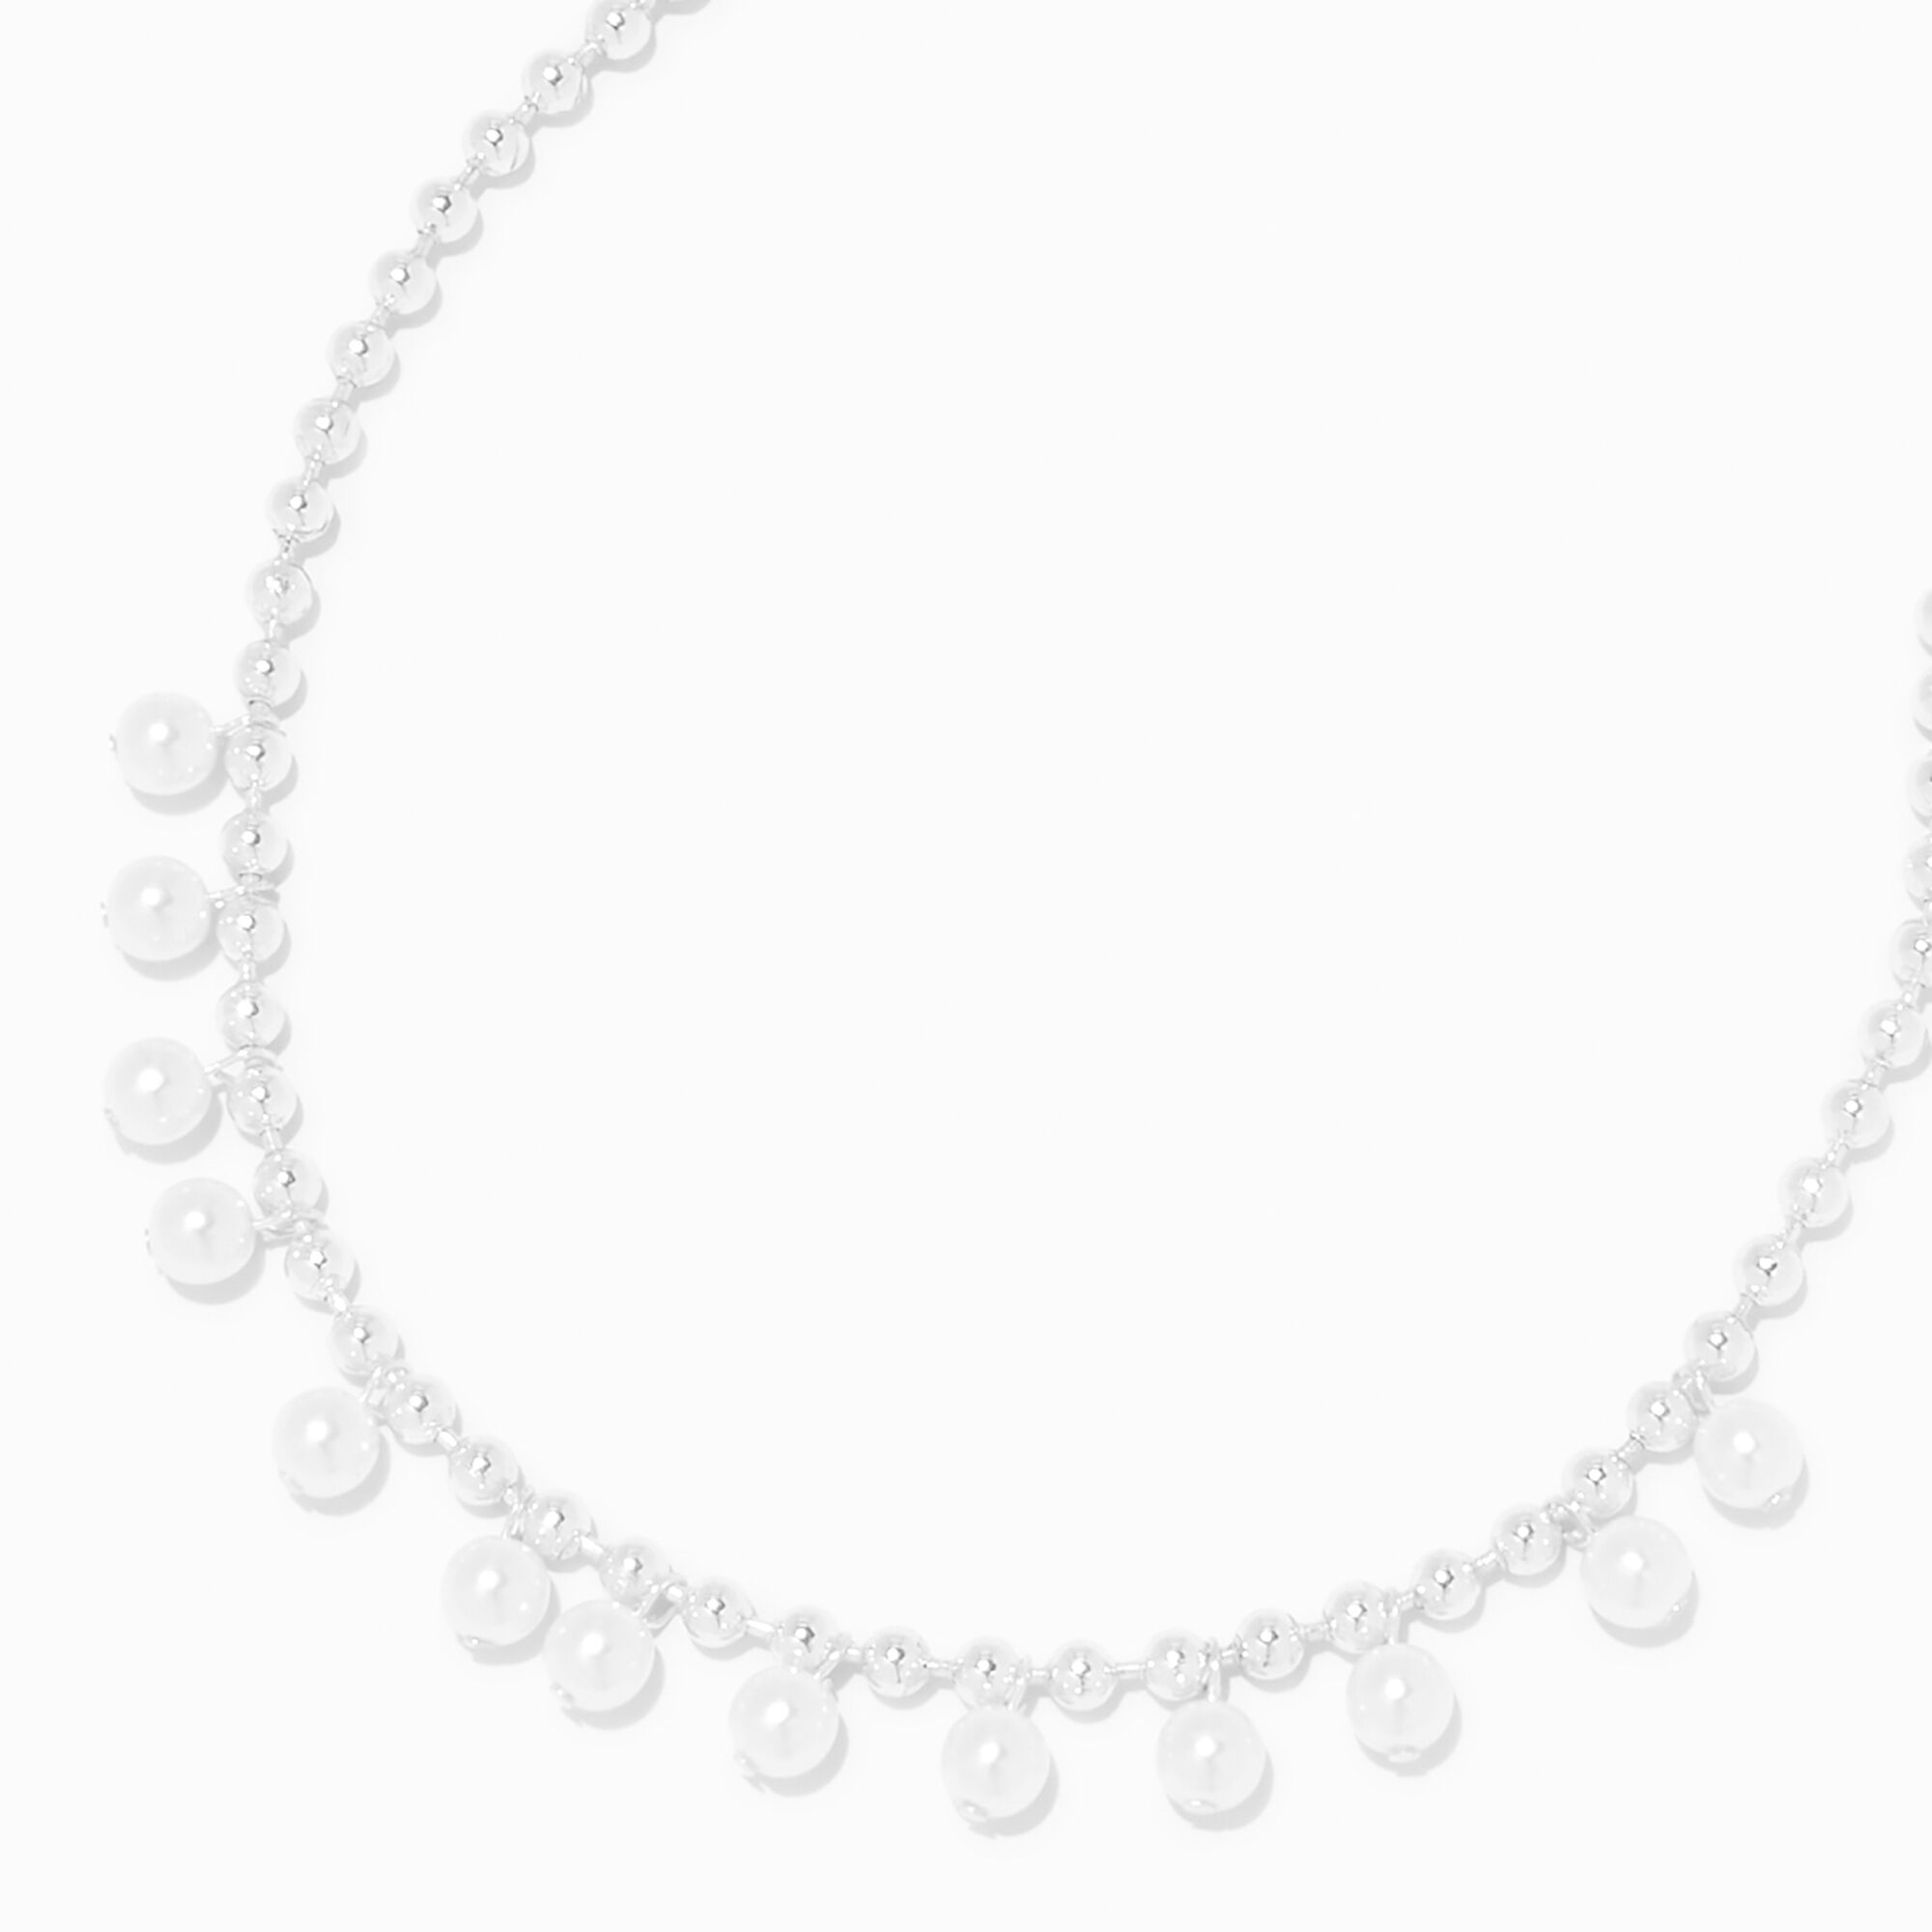 View Claires Tone Beaded Pearl Confetti Necklace Silver information